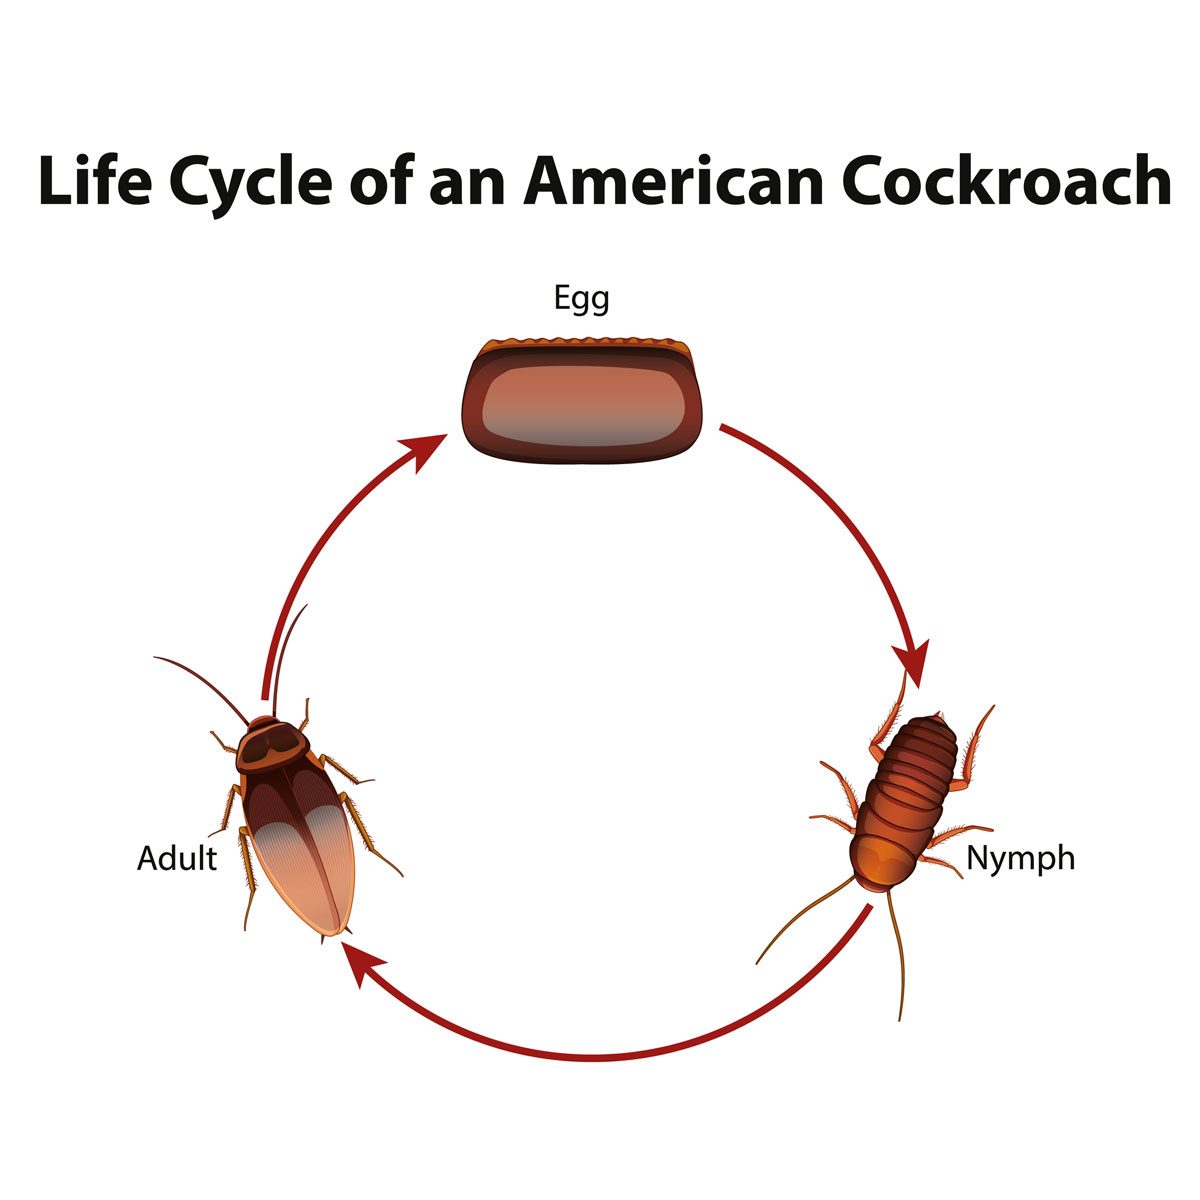 How long does it take for cockroach nymphs to hatch?